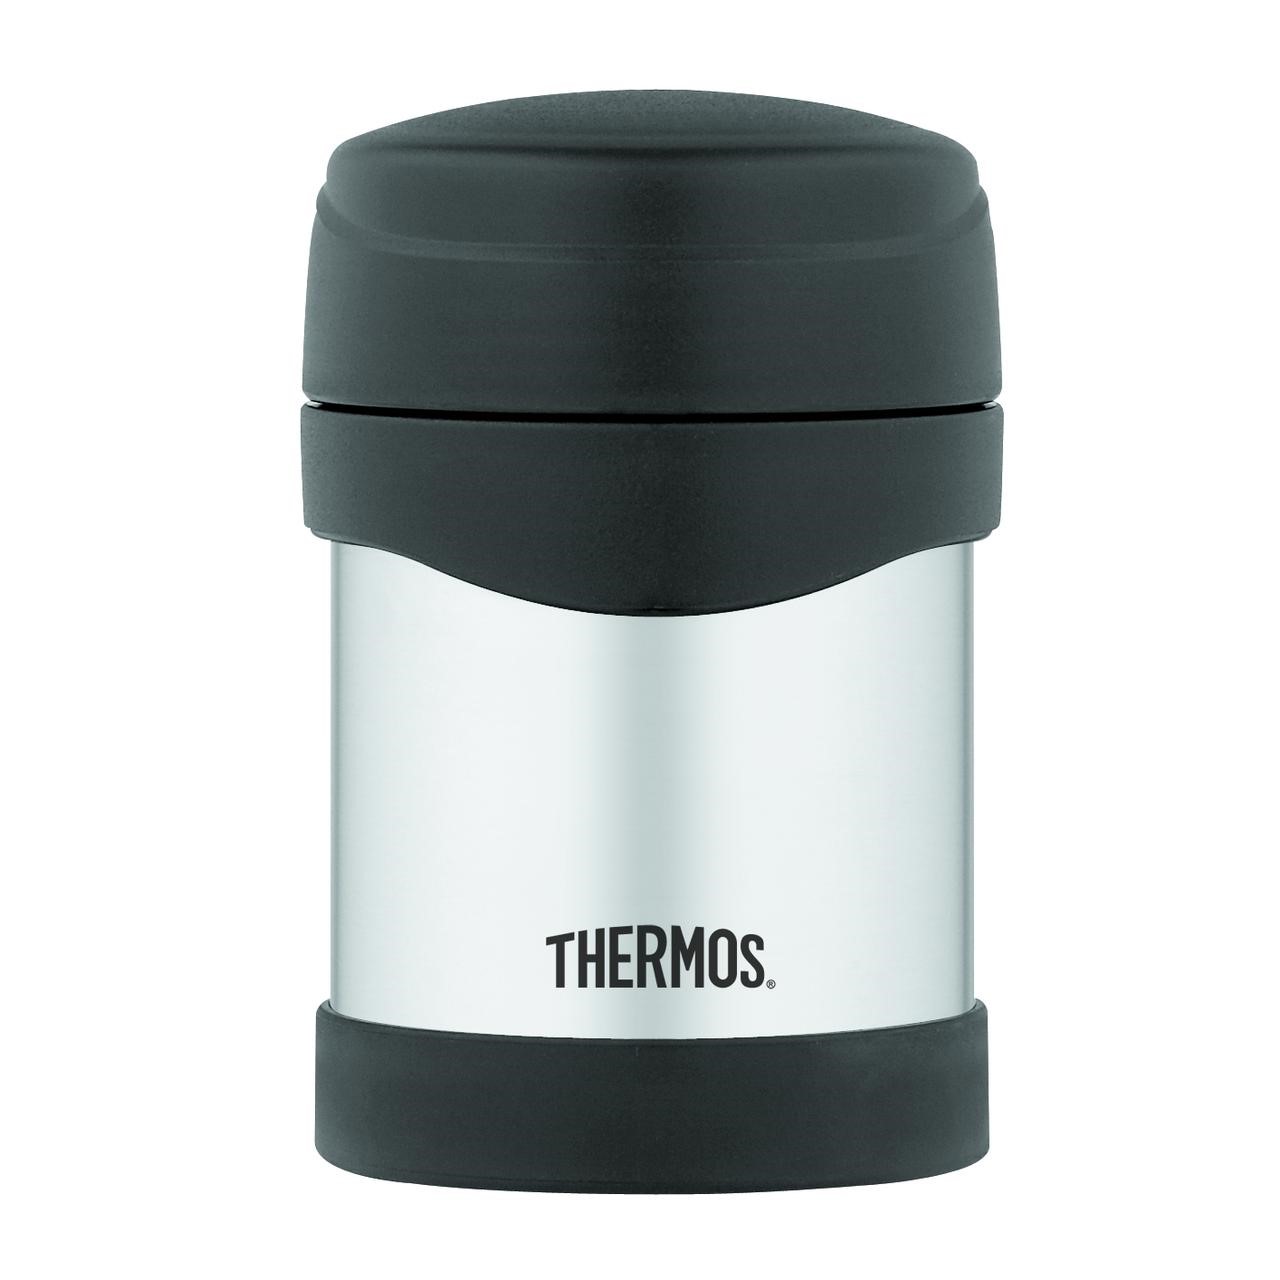 Thermos 10 Oz Vacuum Insulated Food Jar, Stainless Steel - image 1 of 5